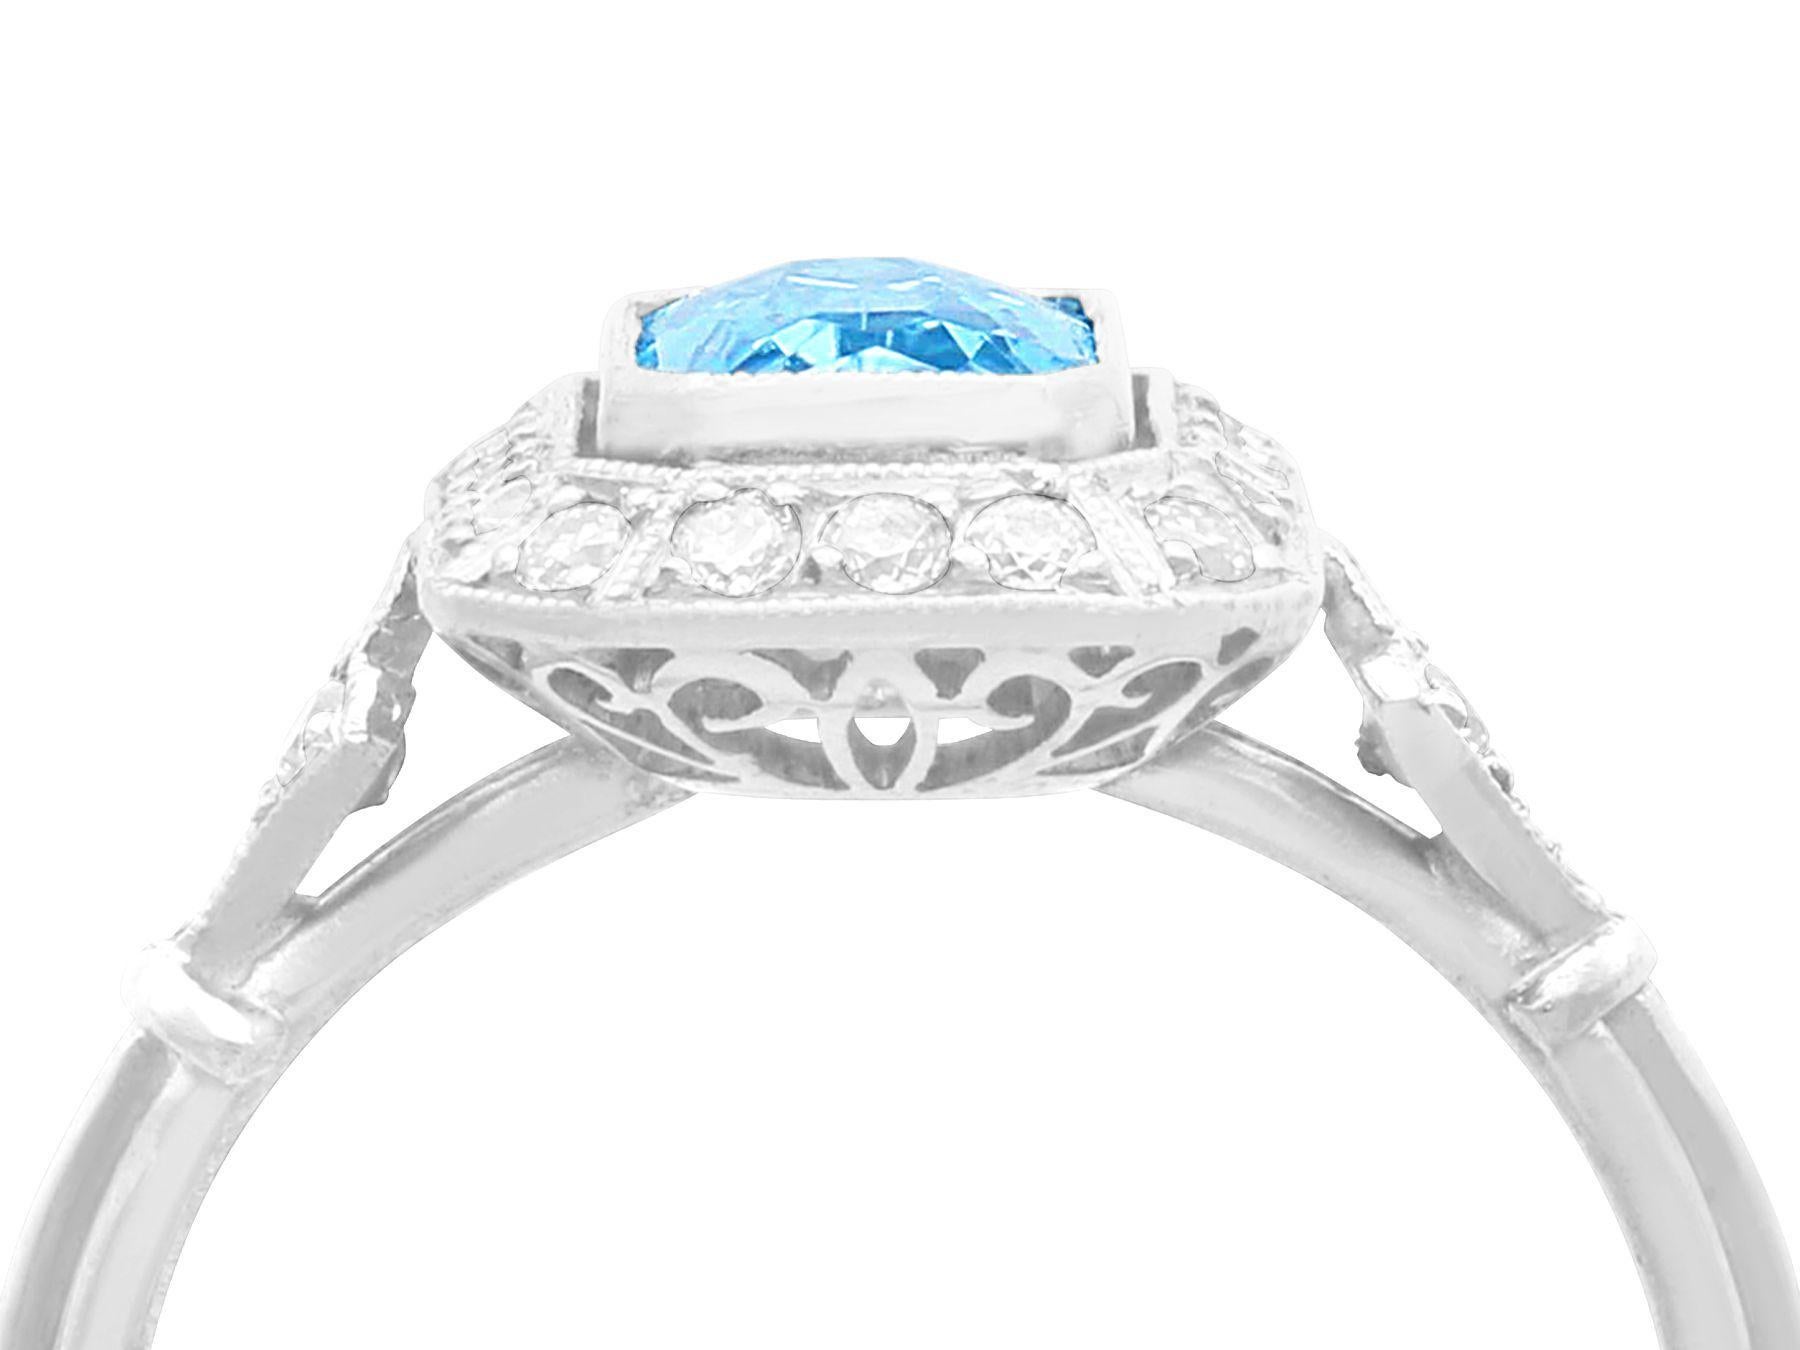 A fine and impressive 1.16 carat aquamarine, 0.30 carat diamond and platinum cocktail ring; part of our diverse gemstone jewelry and estate jewelry collections

This fine and impressive aquamarine ring has been crafted in platinum.

The contemporary